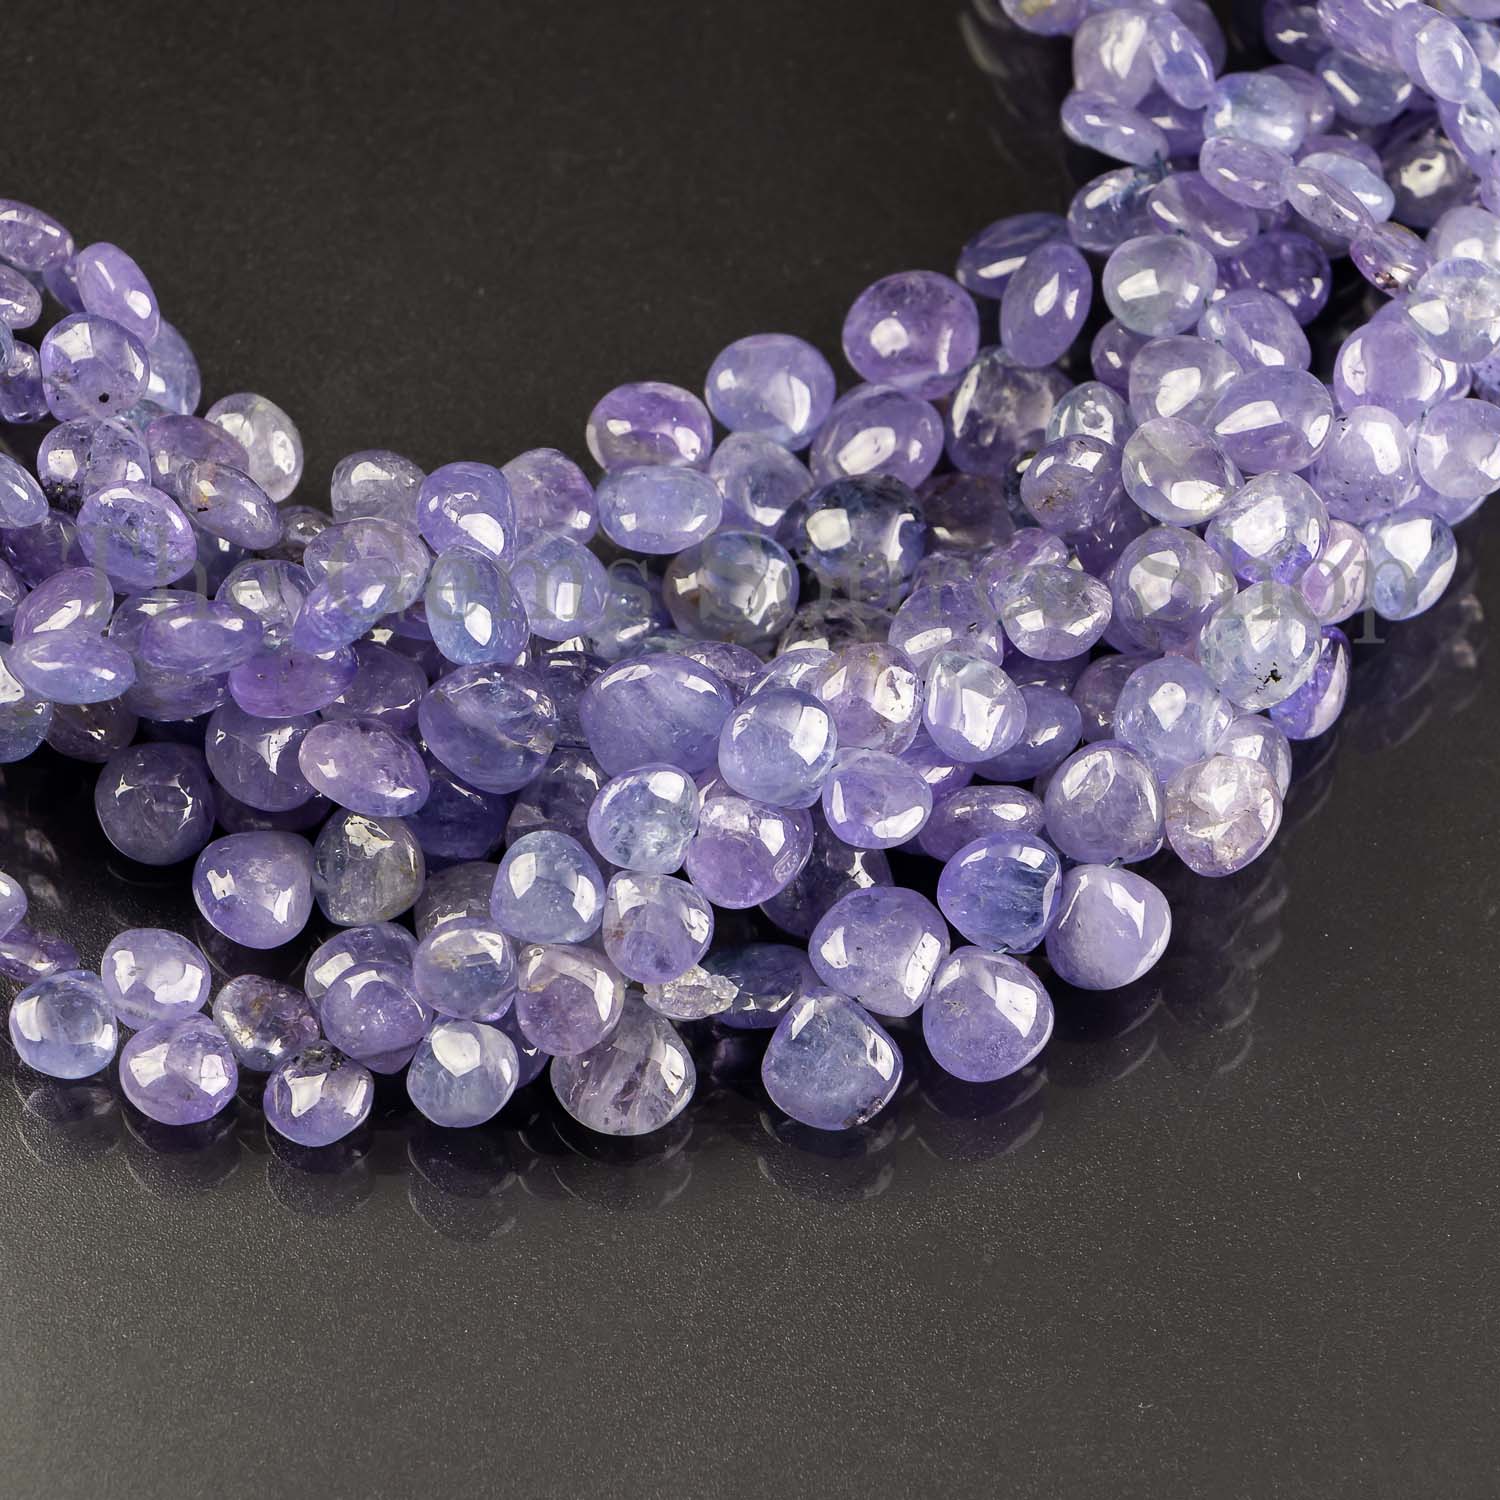 Tanzanite Smooth Heart Beads, Side Drill Heart, Plain Tanzanite Beads For Jewelry, Tanzanite Gemstone